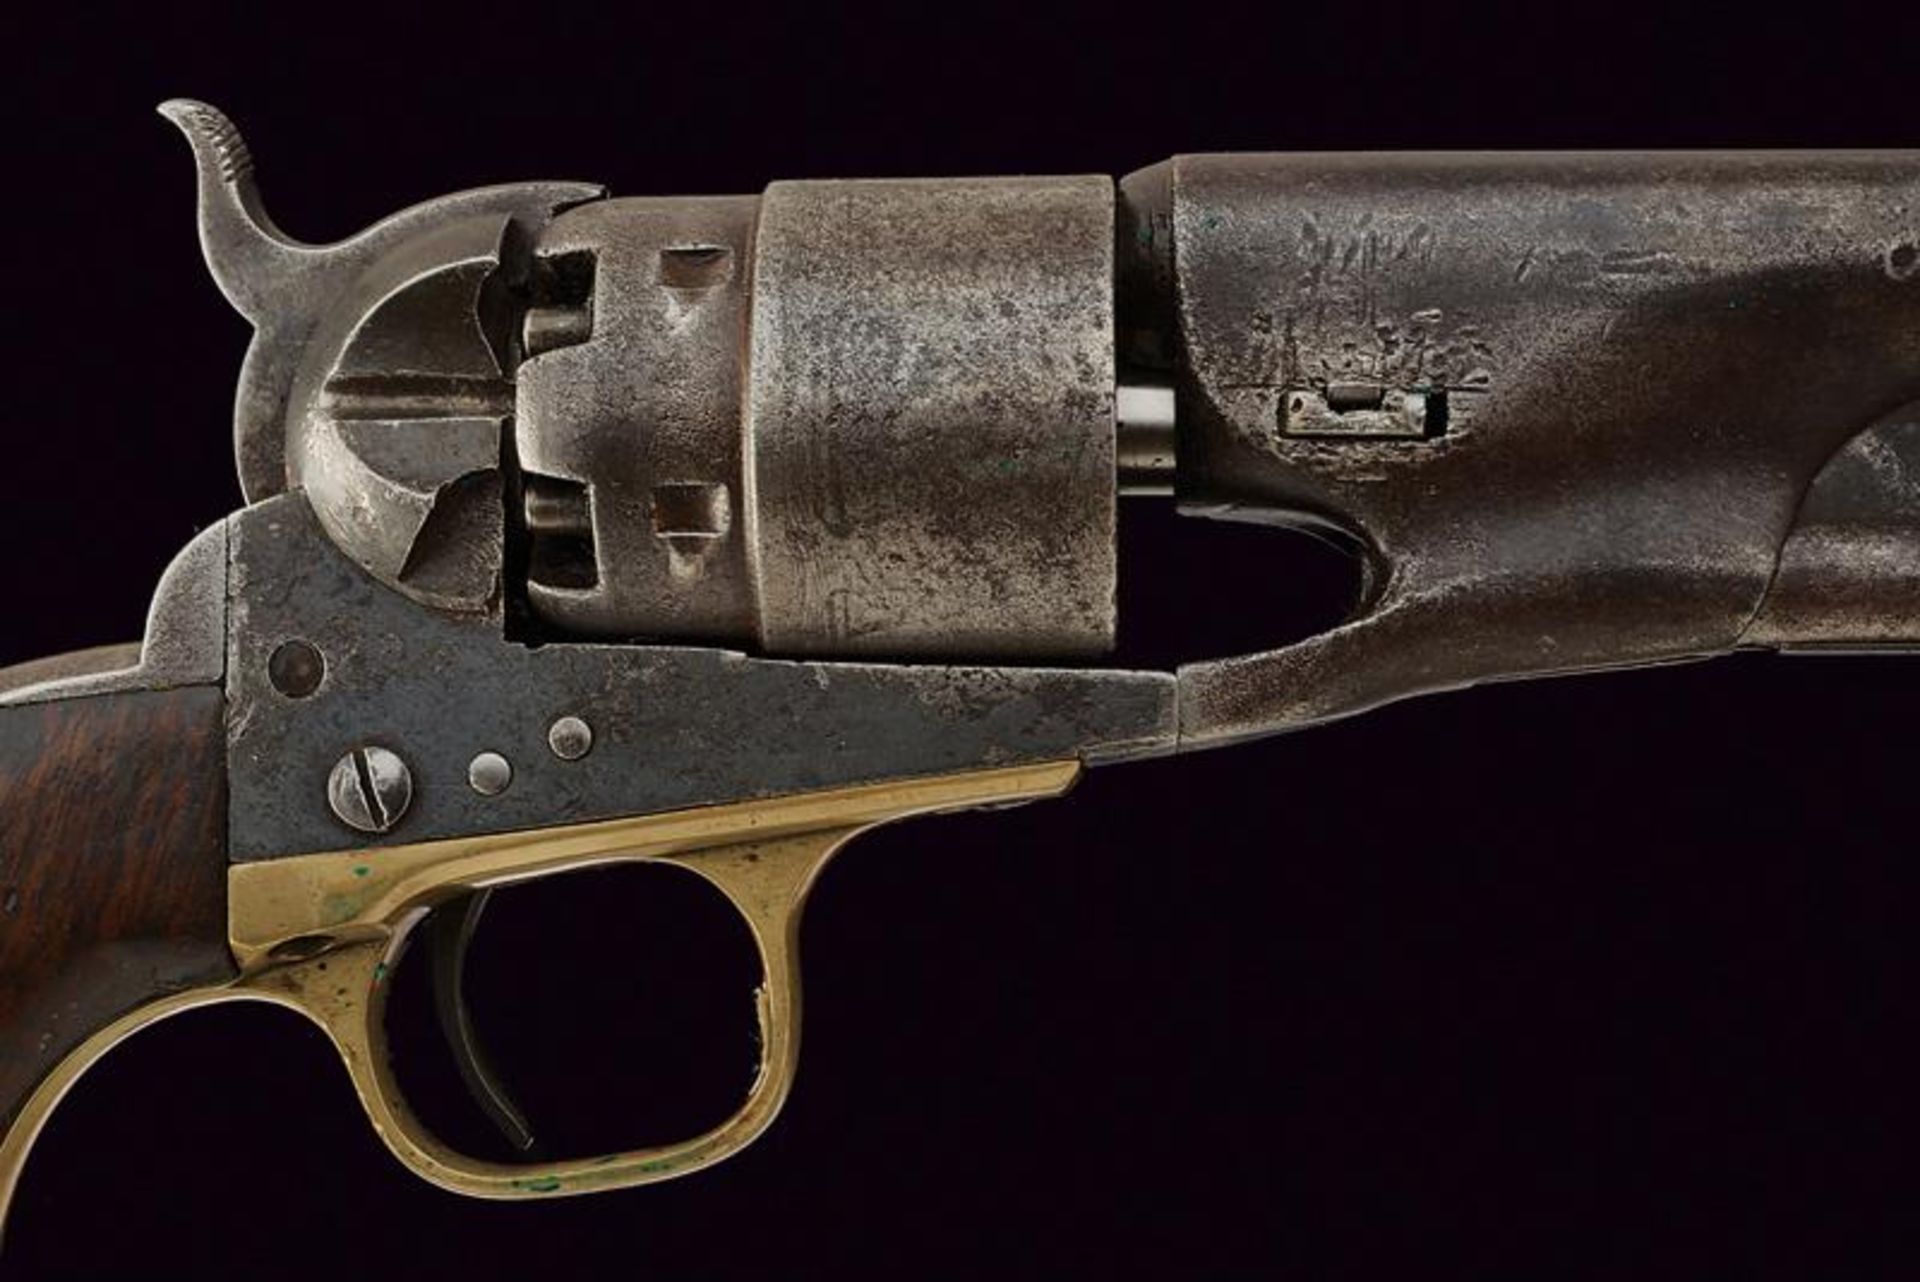 A 1860 Colt Model Army Revolver - Image 2 of 5